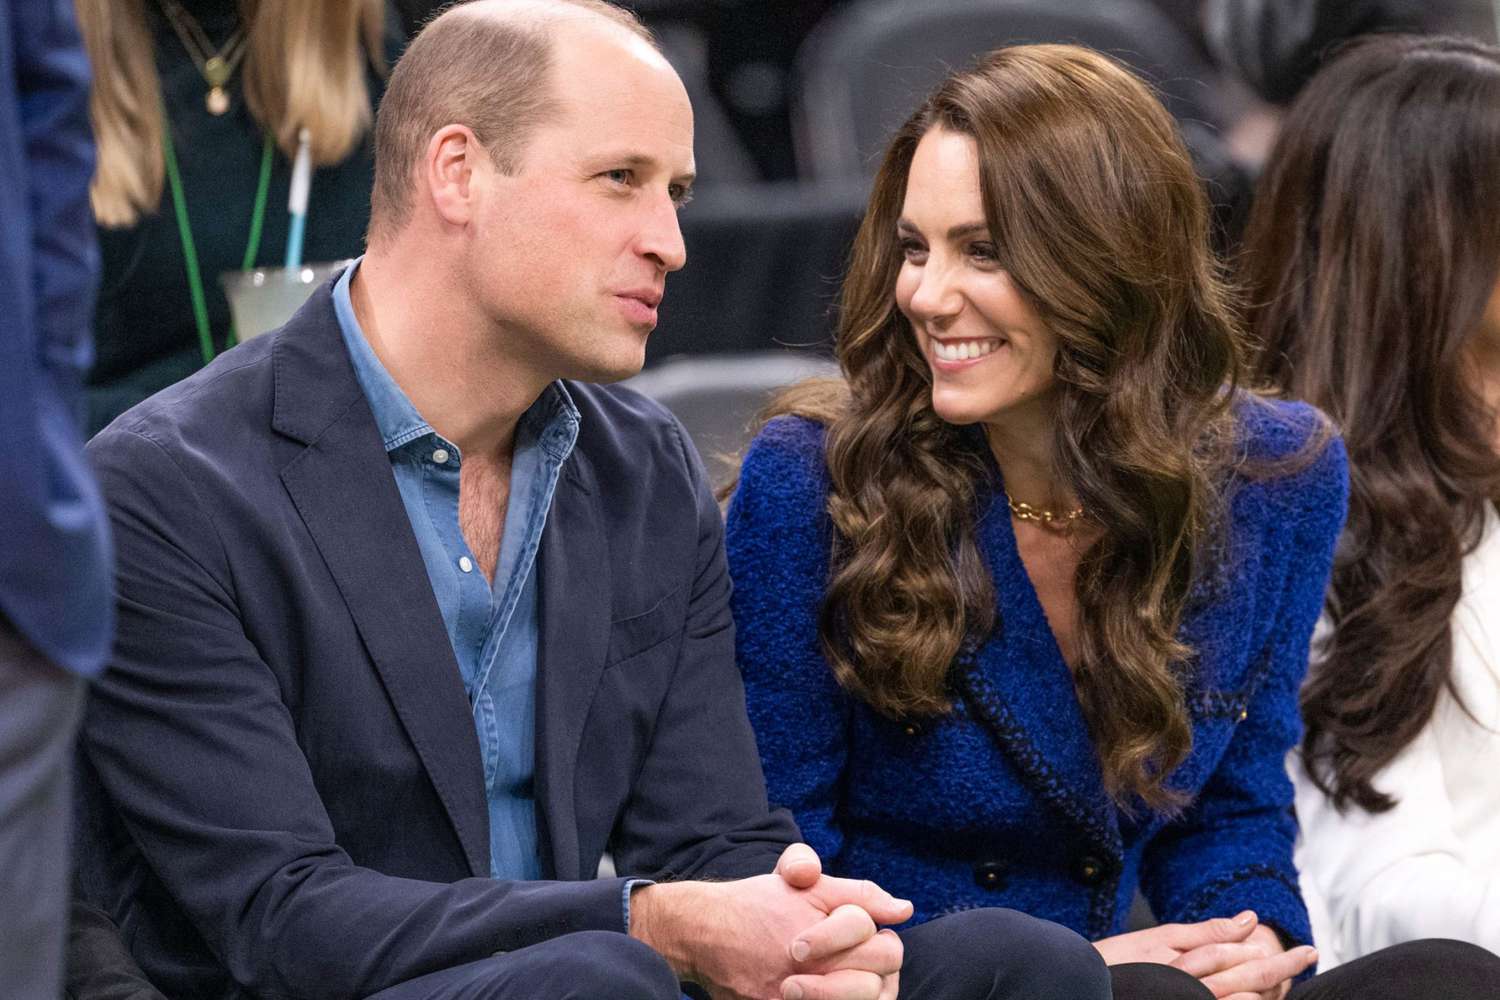 Prince William, Prince of Wales and Catherine, Princess of Wales, watch the NBA basketball game between the Boston Celtics and the Miami Heat at TD Garden on November 30, 2022 in Boston, Massachusetts.